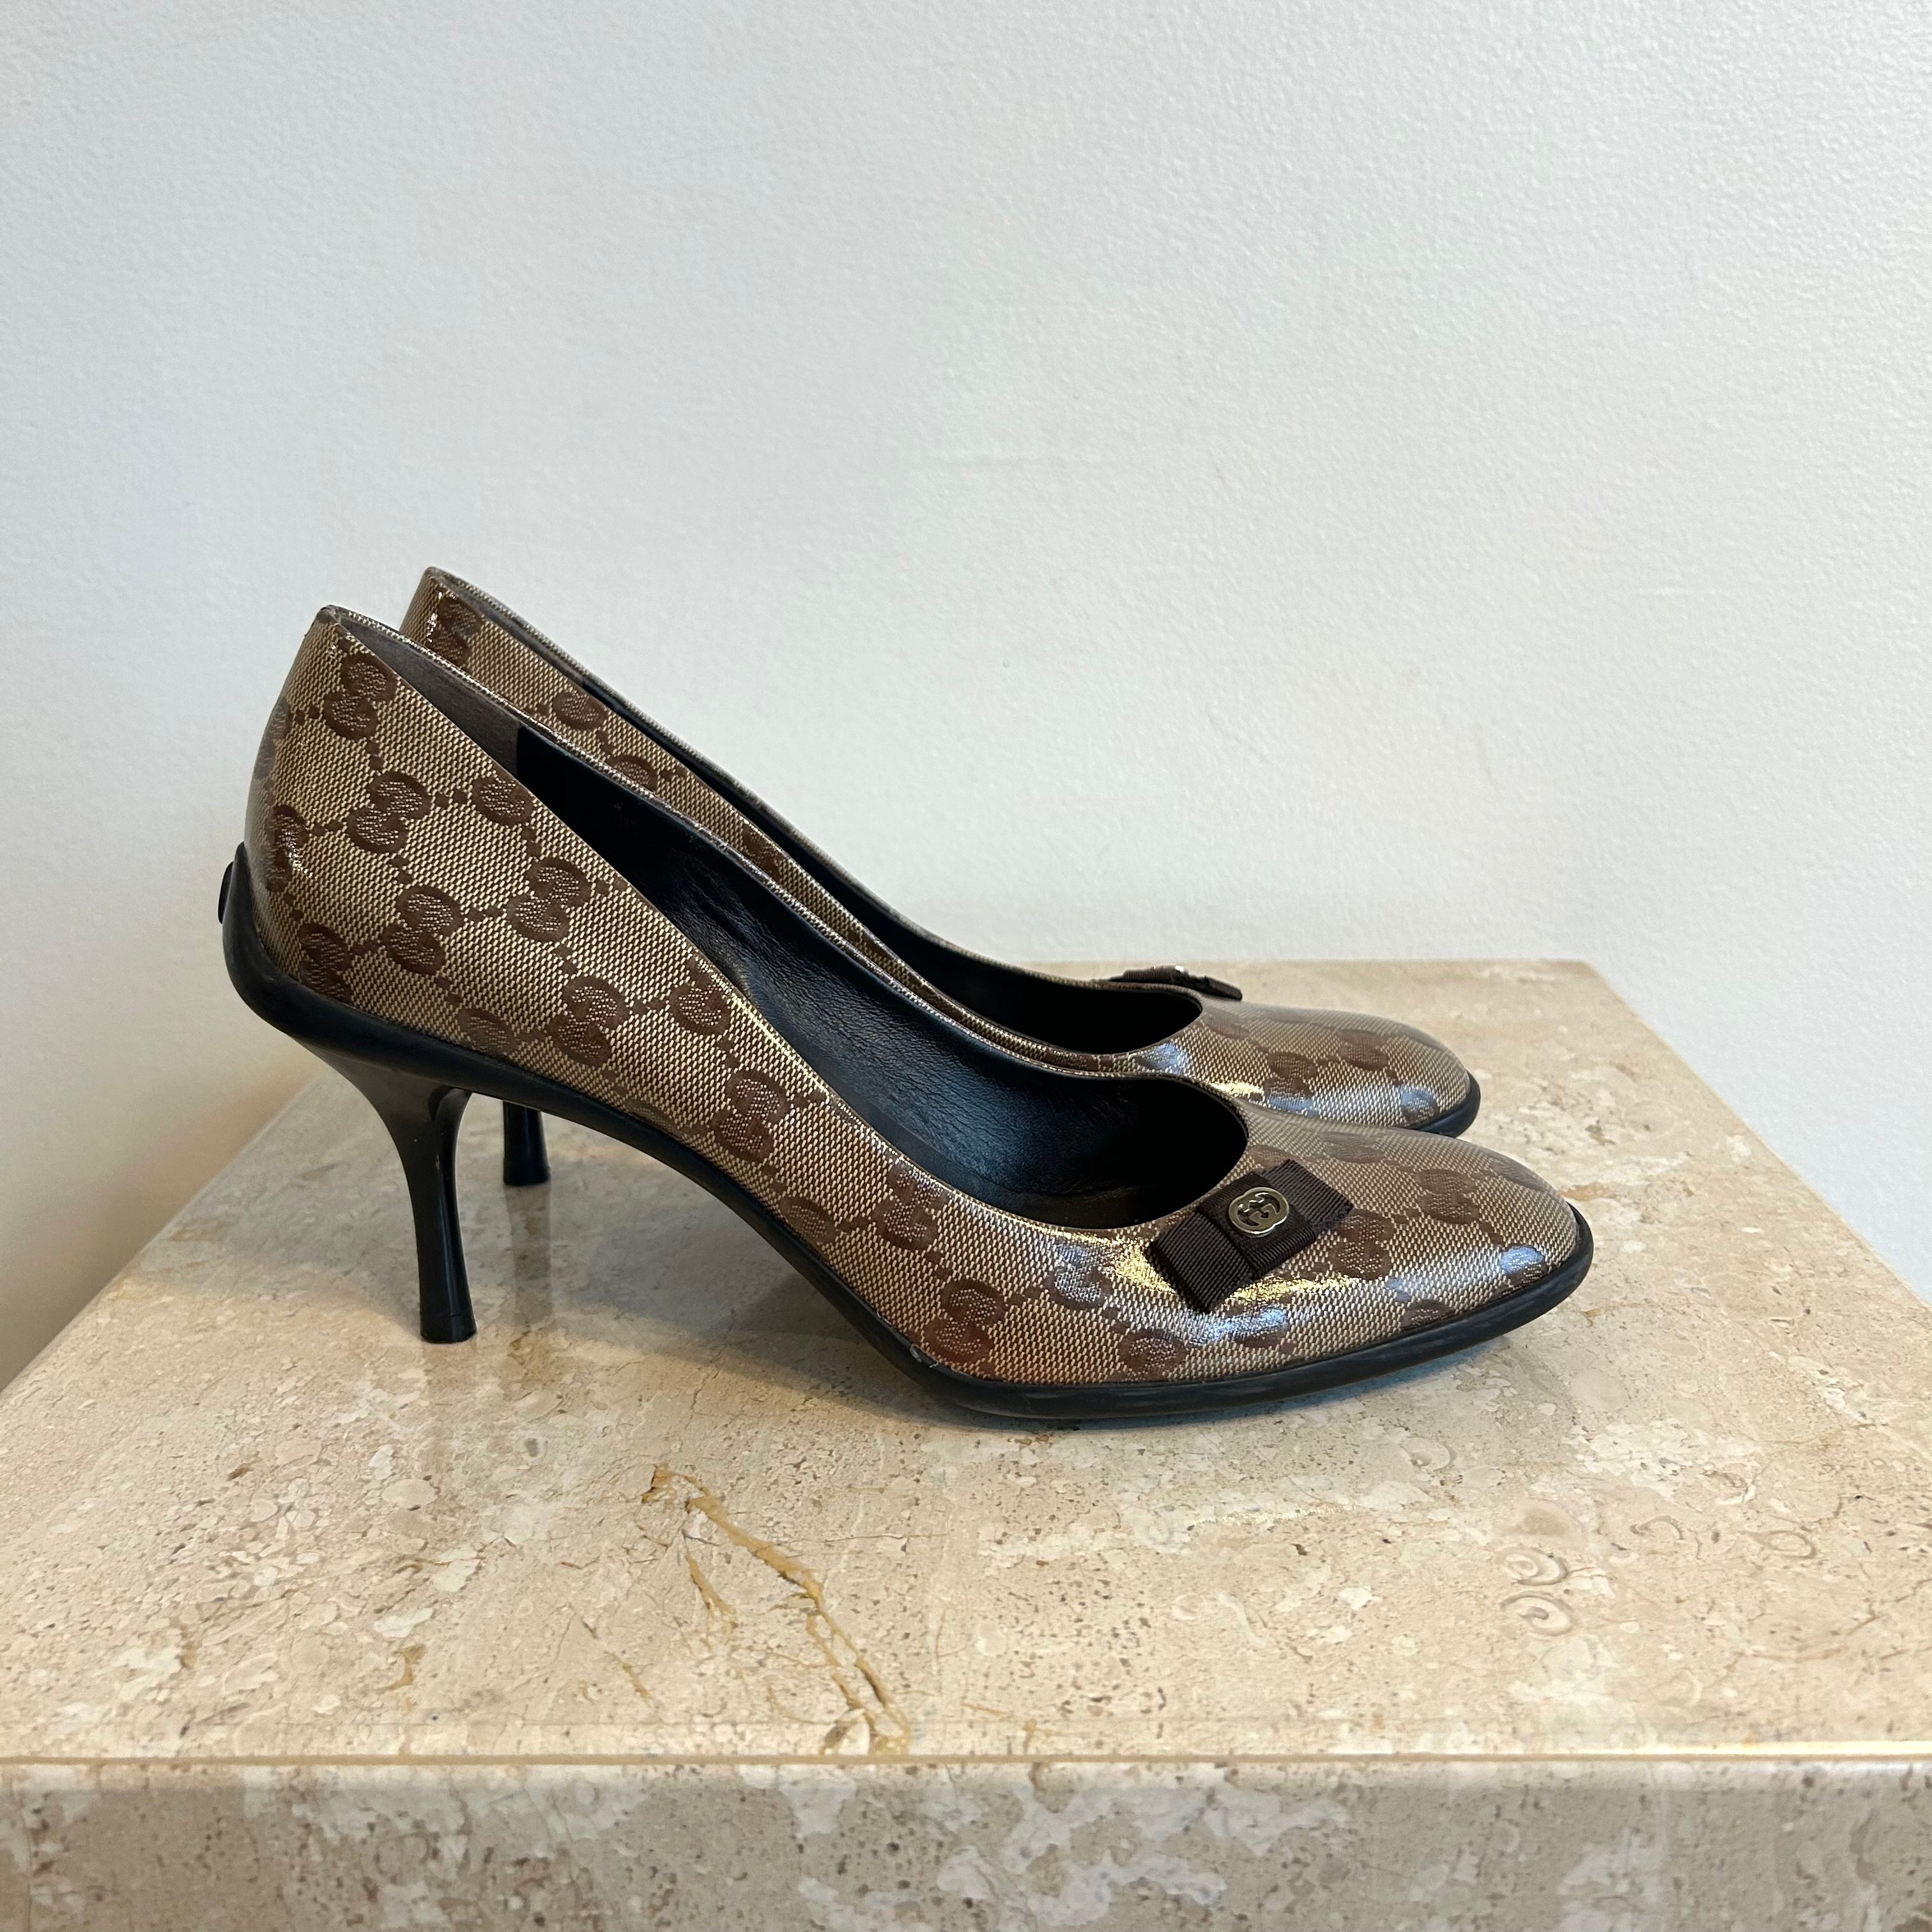 Pre-Owned GUCCI Crystal GG Bow Pumps - Size 39